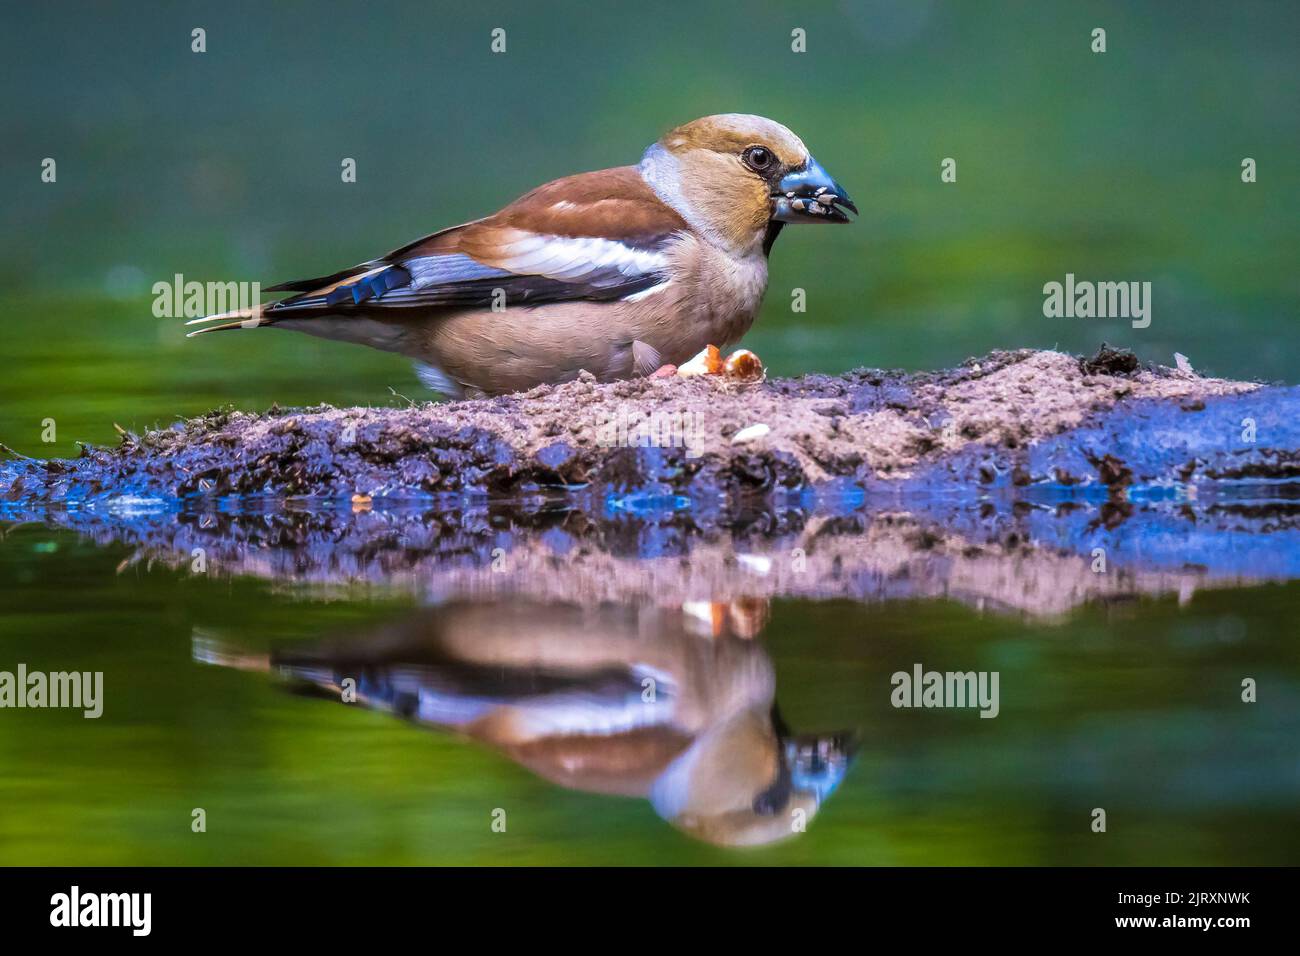 Closeup of a female hawfinch Coccothraustes coccothraustes bird perched in a forest. Selective focus and natural sunlight Stock Photo